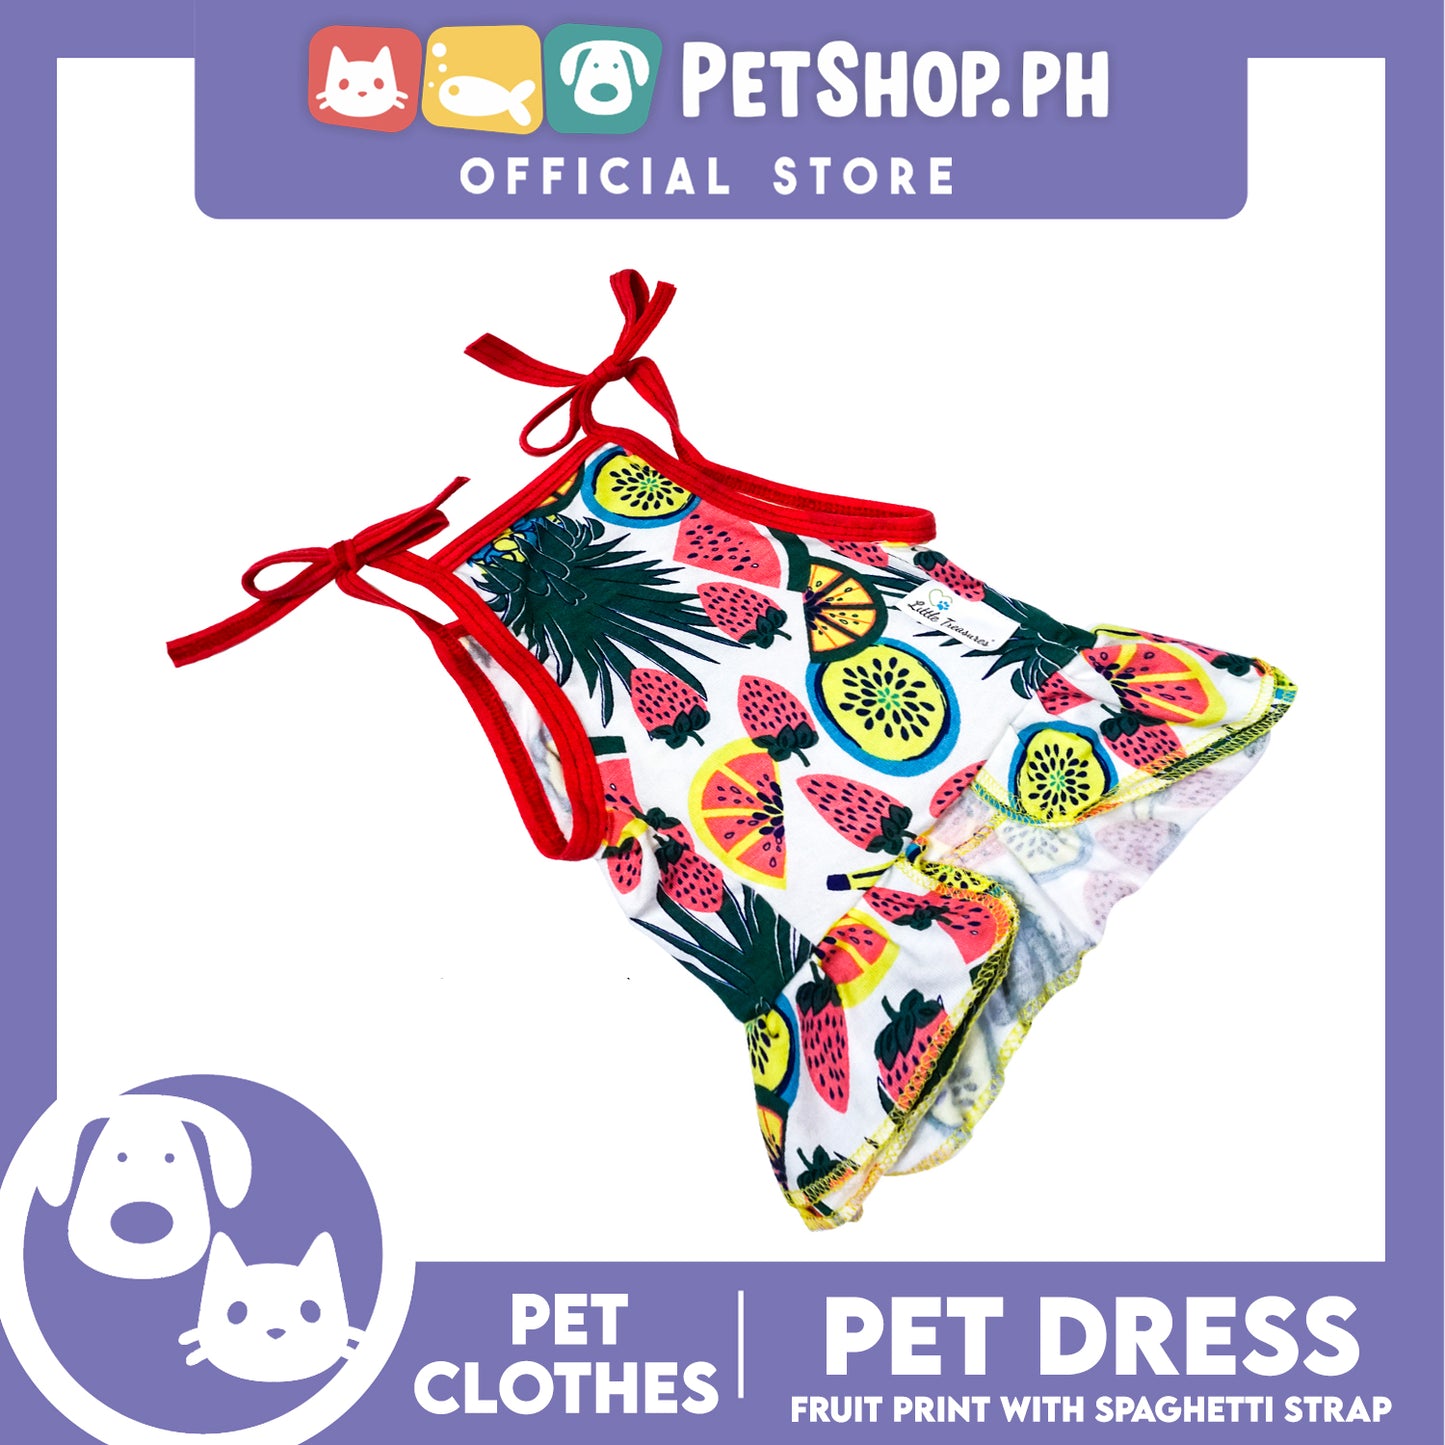 Pet Dress Fruit Print with Spaghetti Strap (Extra Large) Pet Dress Clothes Perfect for Dogs